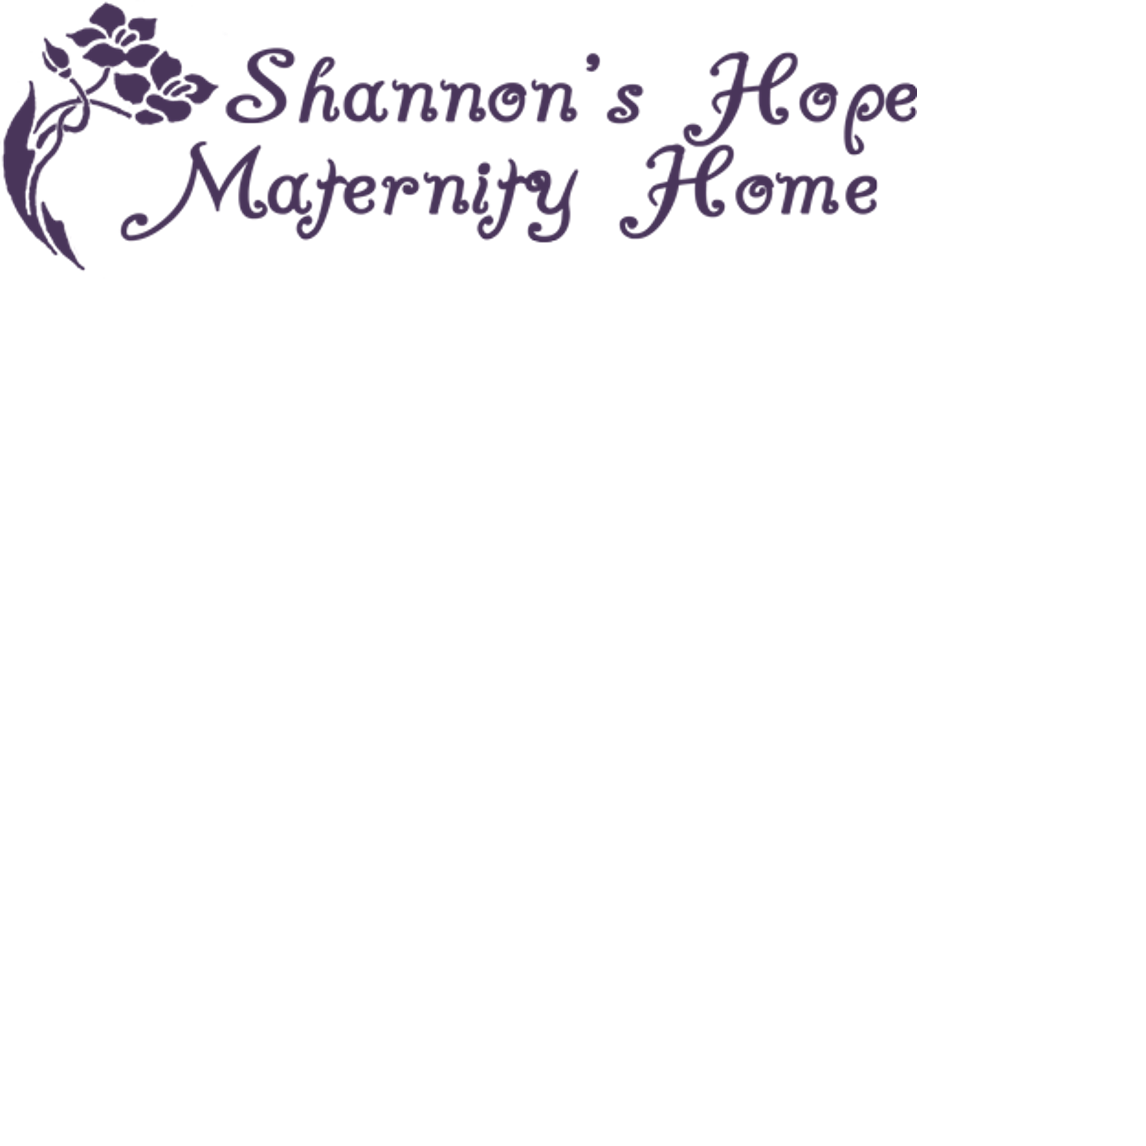 Shannon's Hope  A Christian Maternity Home